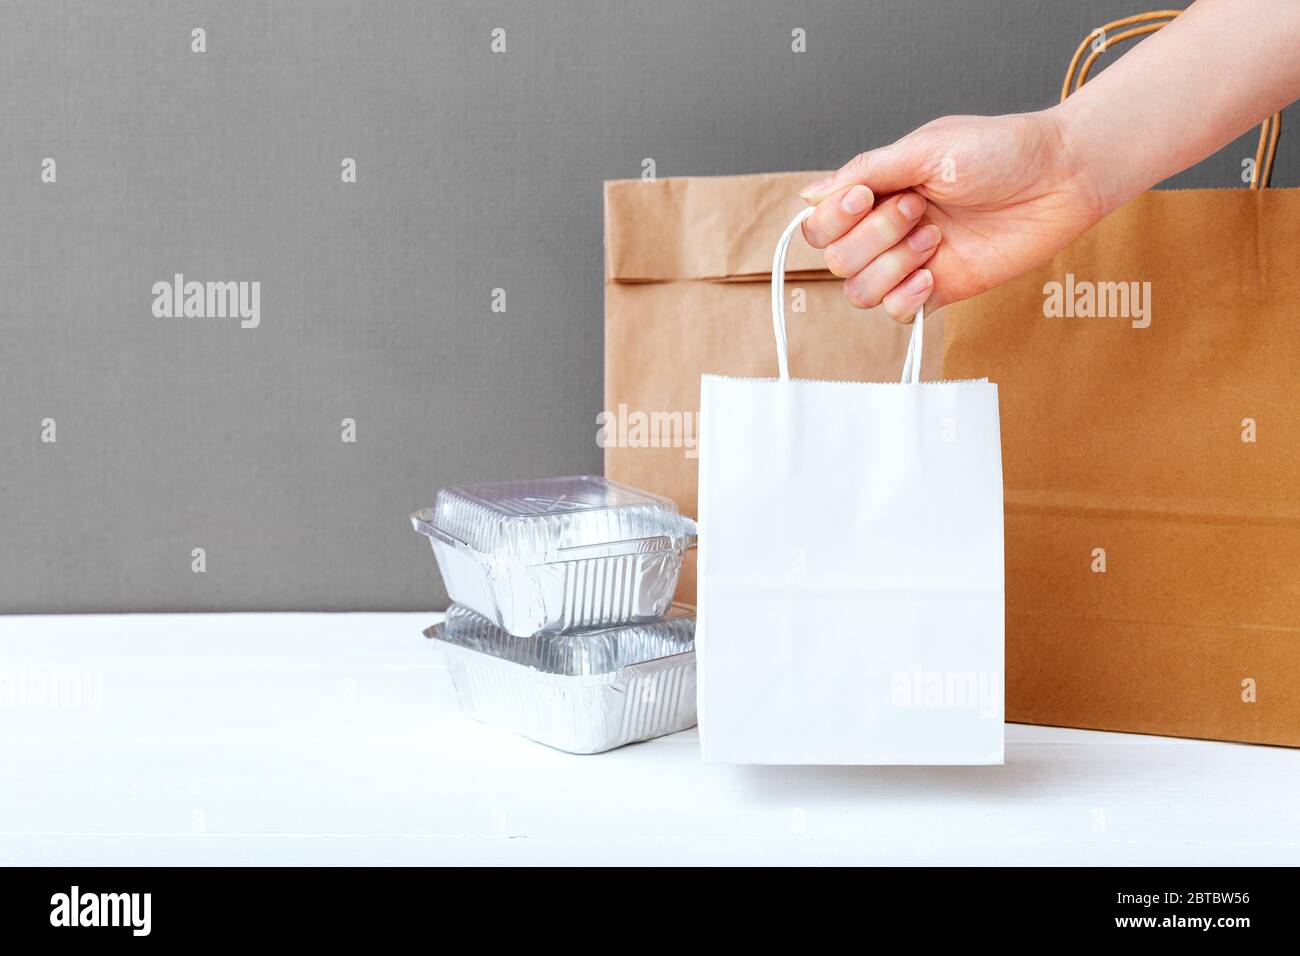 Download White Craft Paper Bag In Female Hand Delivery Mock Up Packaging Food Foil Containers And Paper Packages On Table Gray Background Food Delivery Stock Photo Alamy